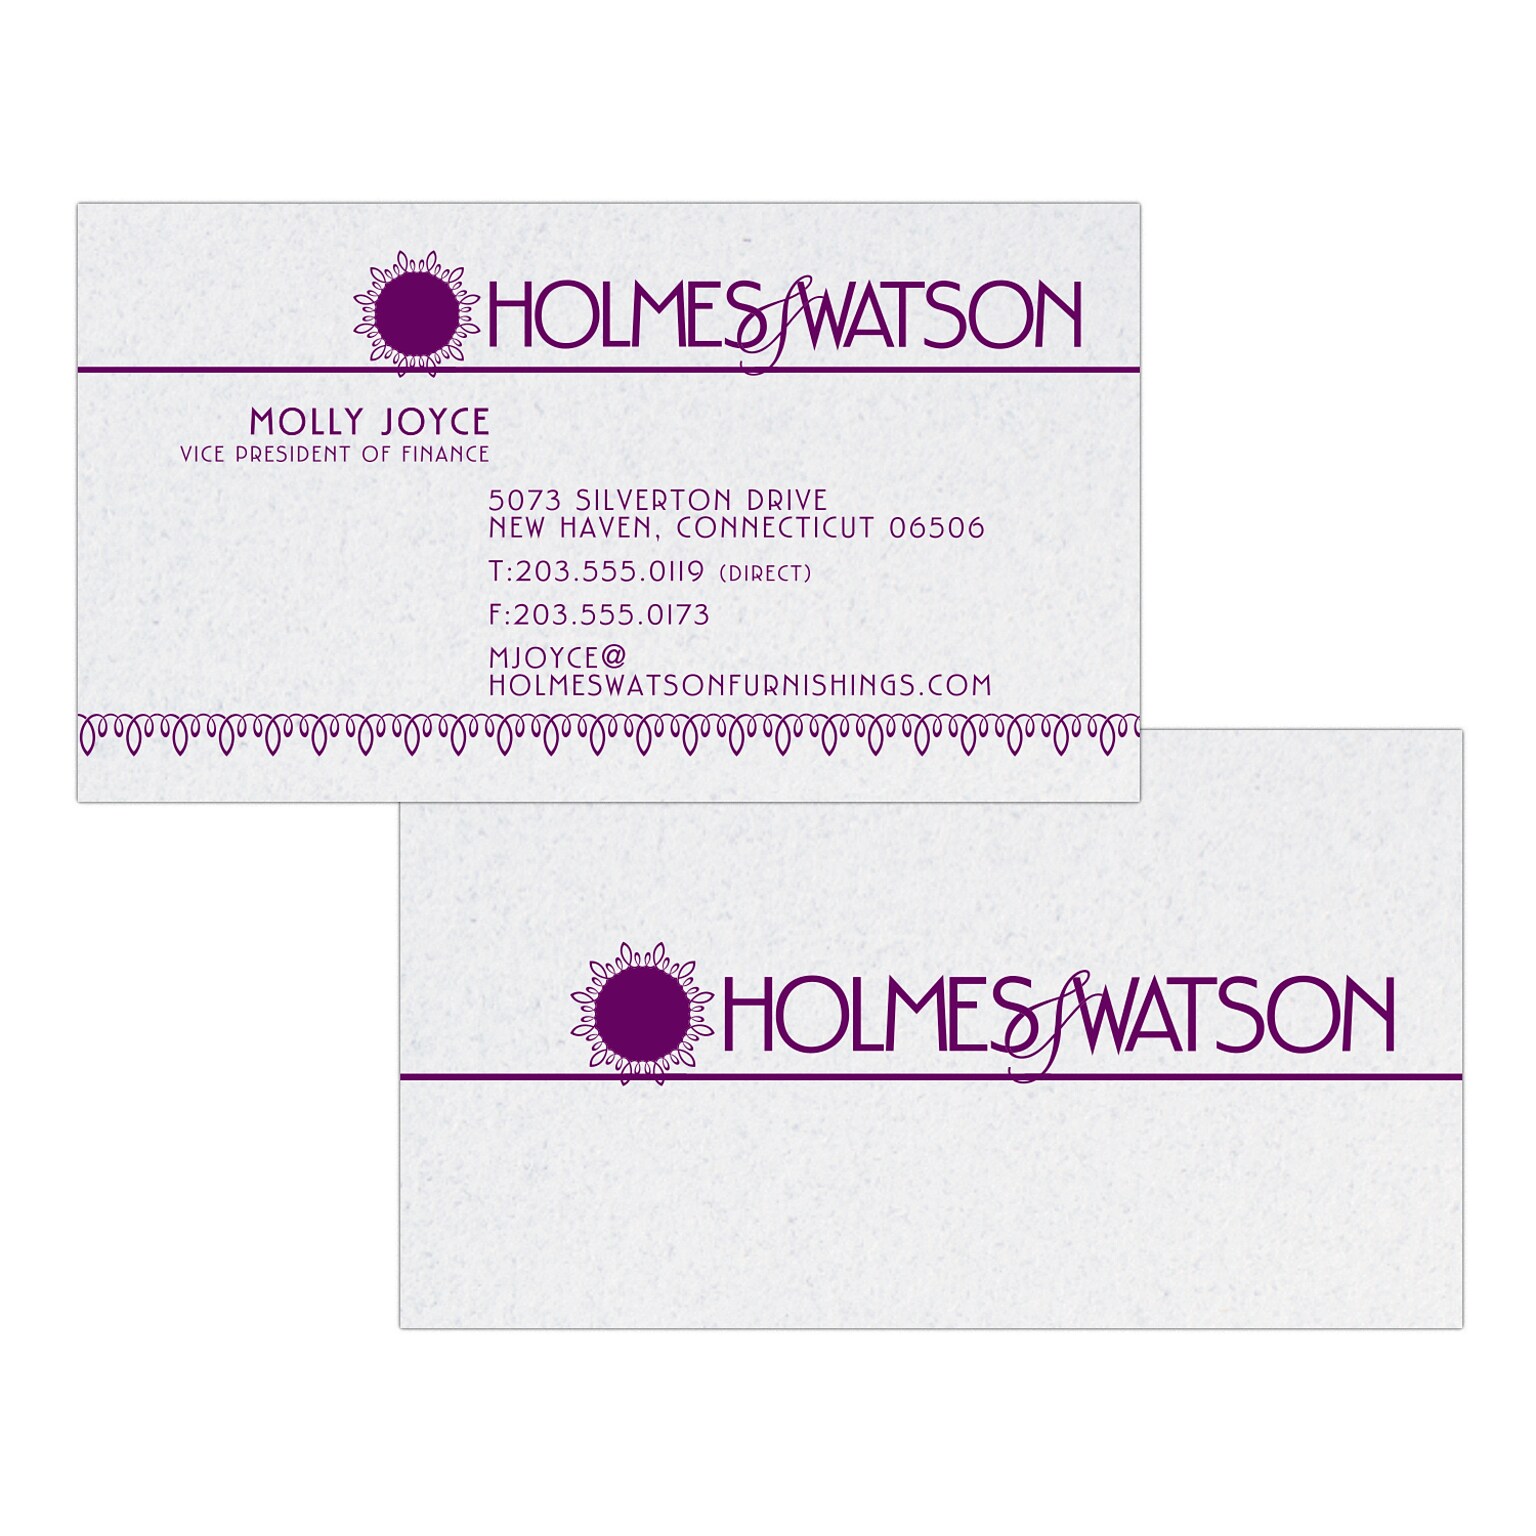 Custom 1-2 Color Business Cards, CLASSIC CREST® Smooth Whitestone 80#, Flat Print, 1 Custom Ink, 2-Sided, 250/PK